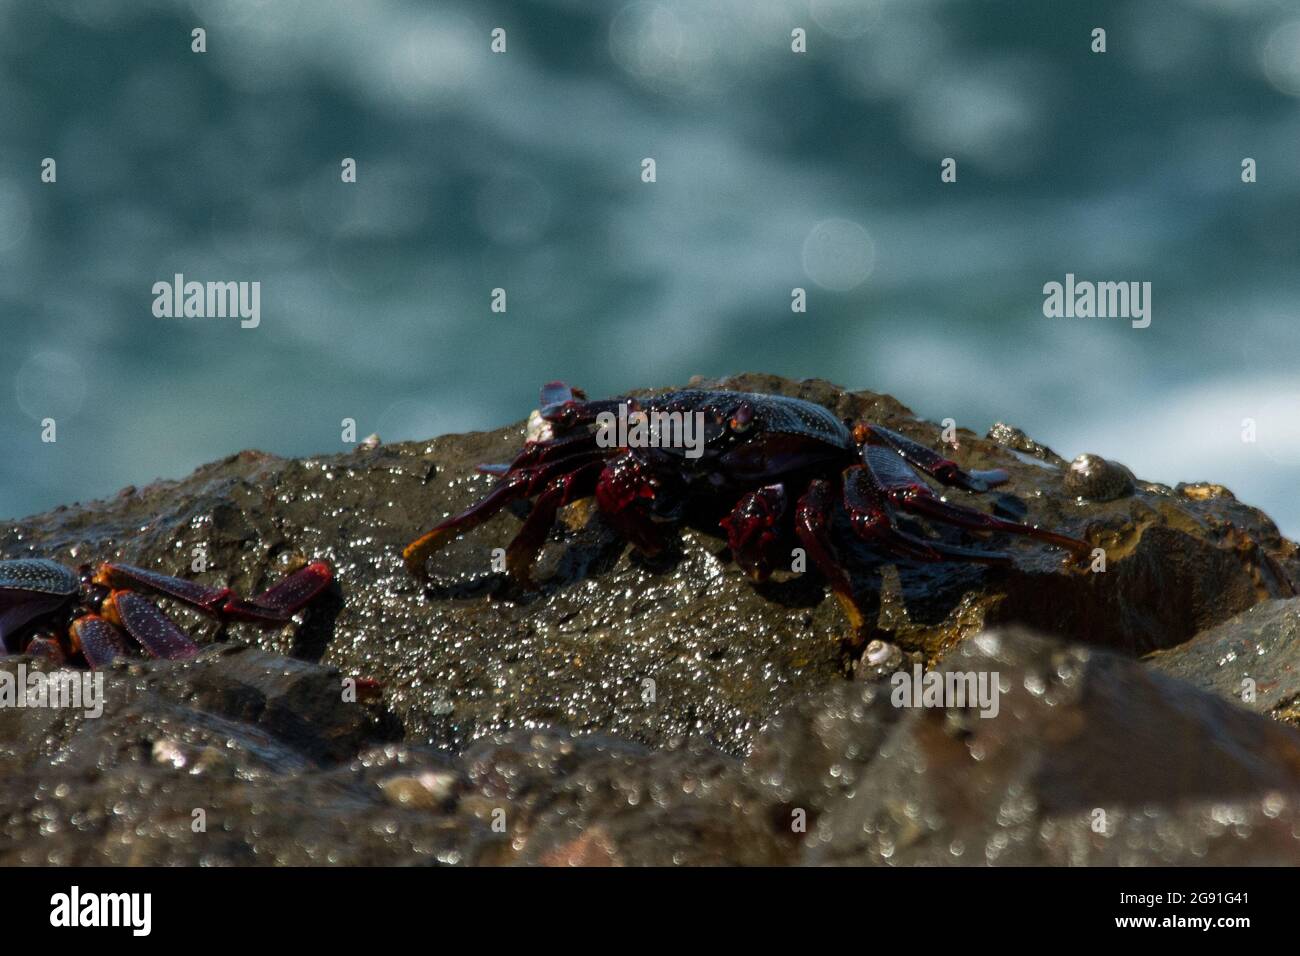 Red Rock Crab sitting in some breakers just aside Baja de las Roques at the very northwest of La Gomera in the Canary Islands. Stock Photo